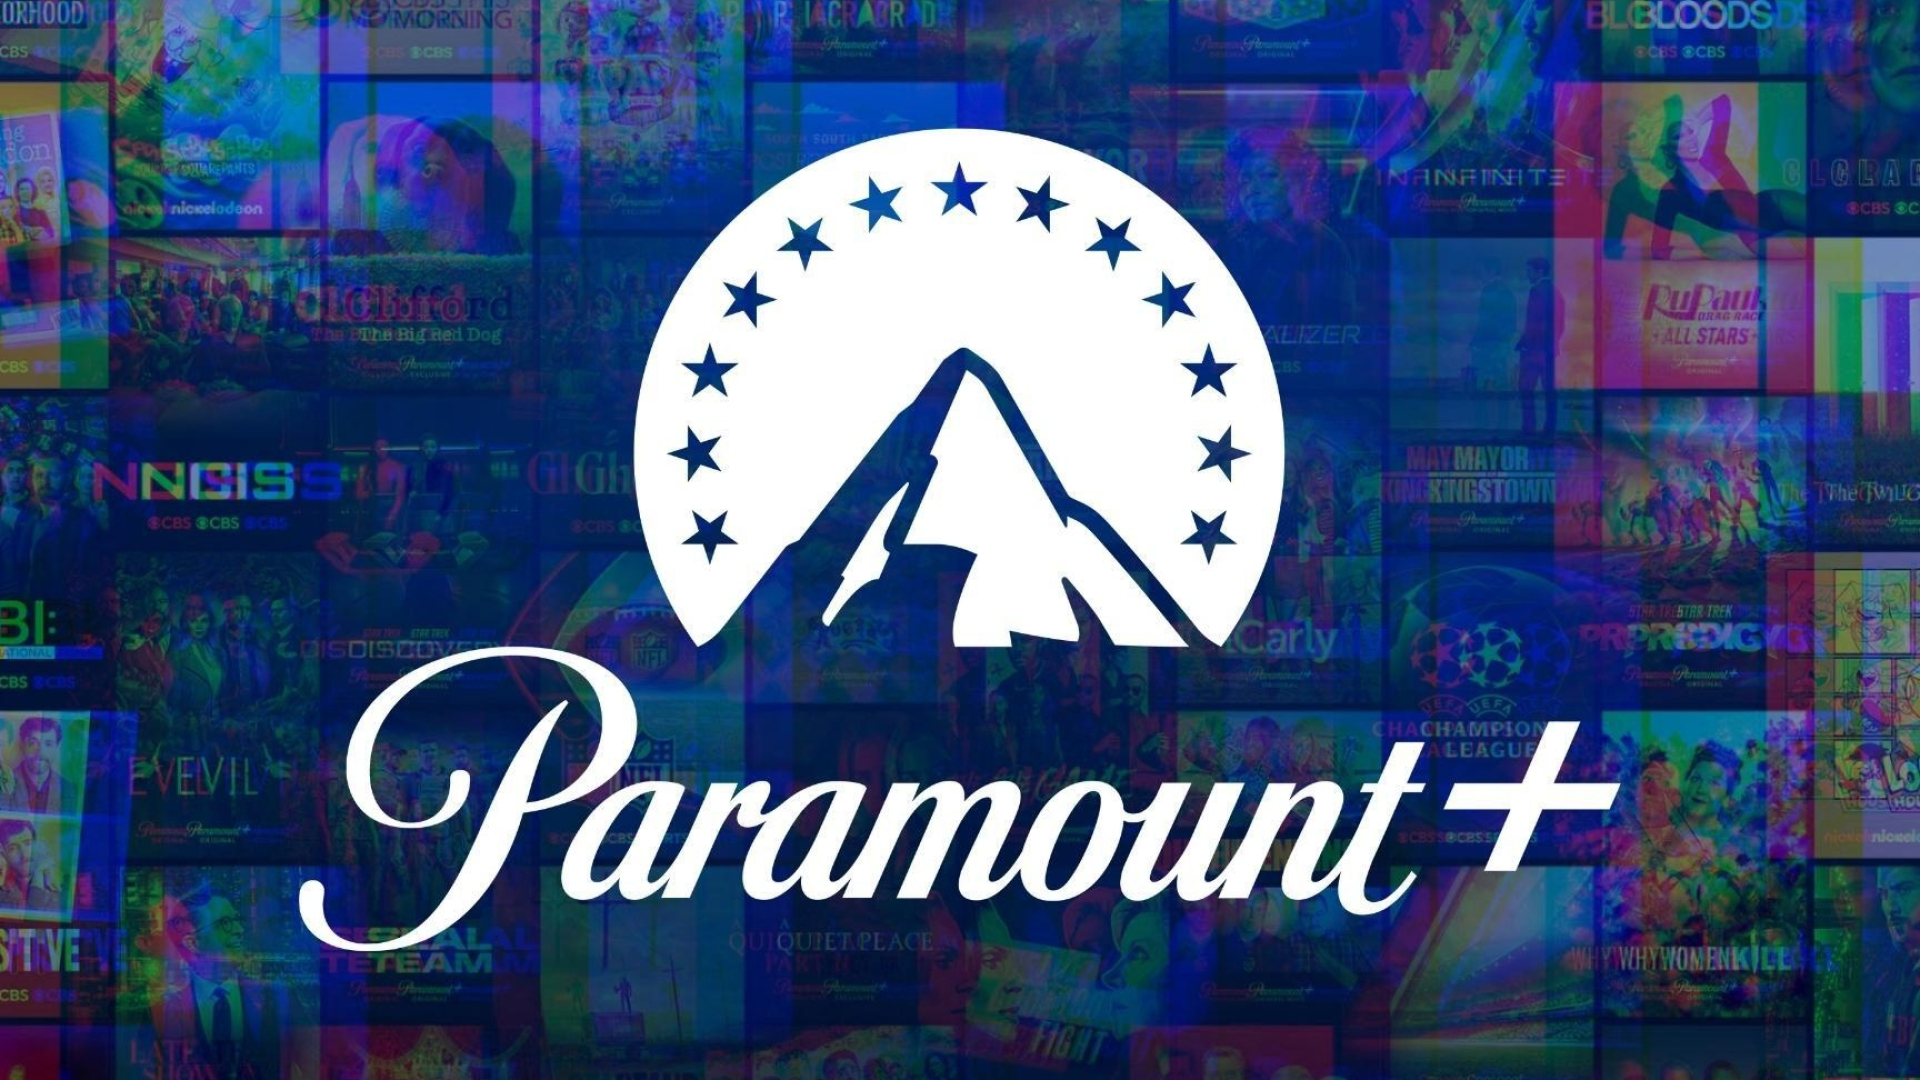 Paramount coupon code, Sign up offer, One month free, Exclusive deals, 1920x1080 Full HD Desktop